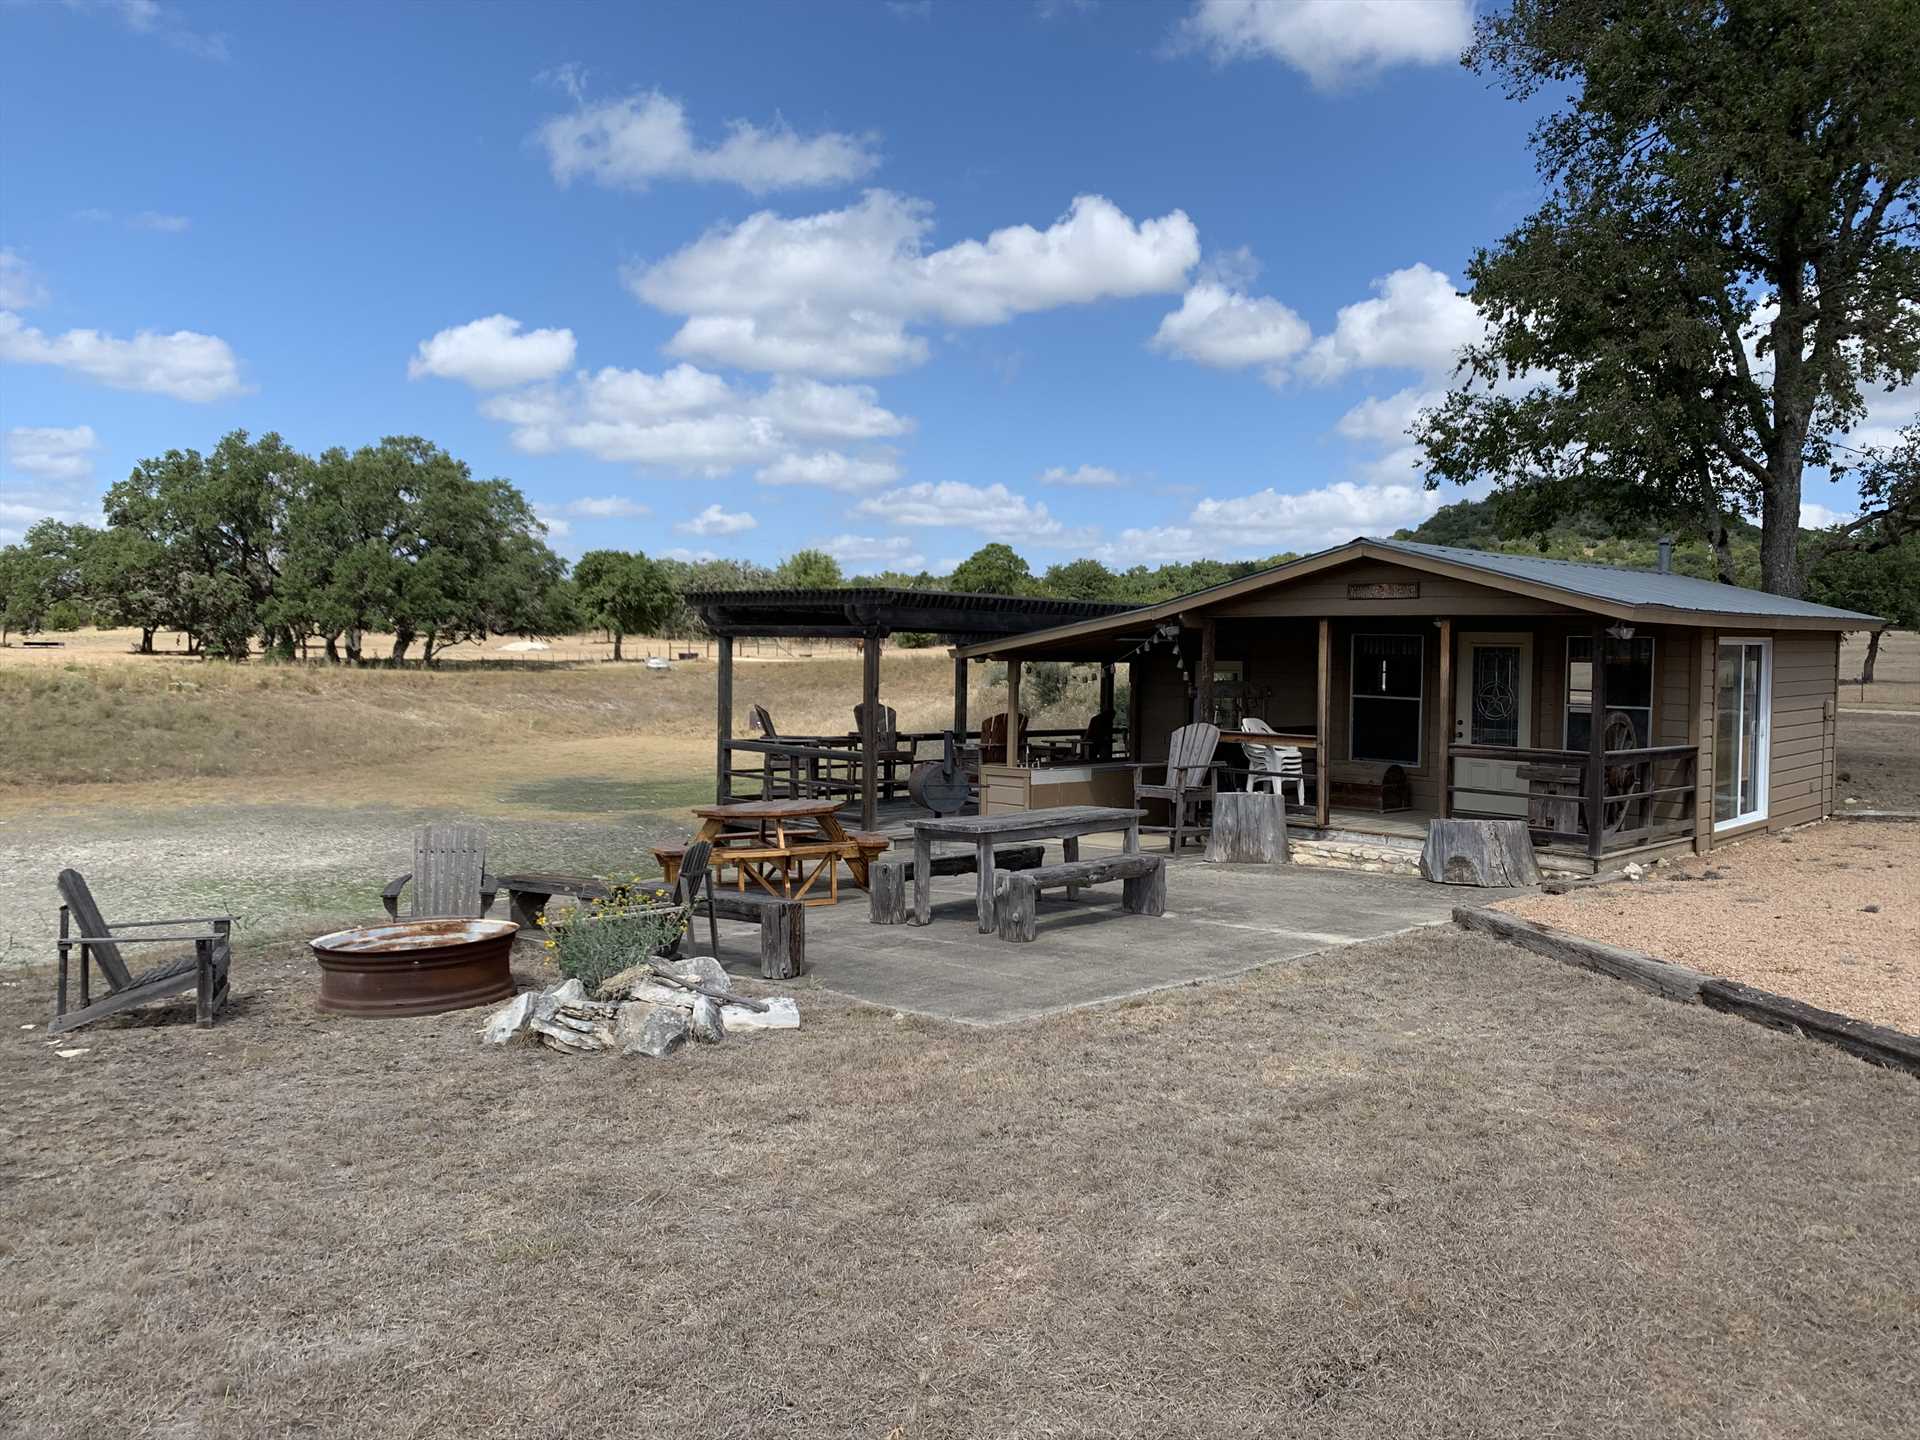                                                 All guests at Tabasco Ranch are invited to enjoy the shared pavilion on the property. It's a wonderful spot for cookouts and socializing!